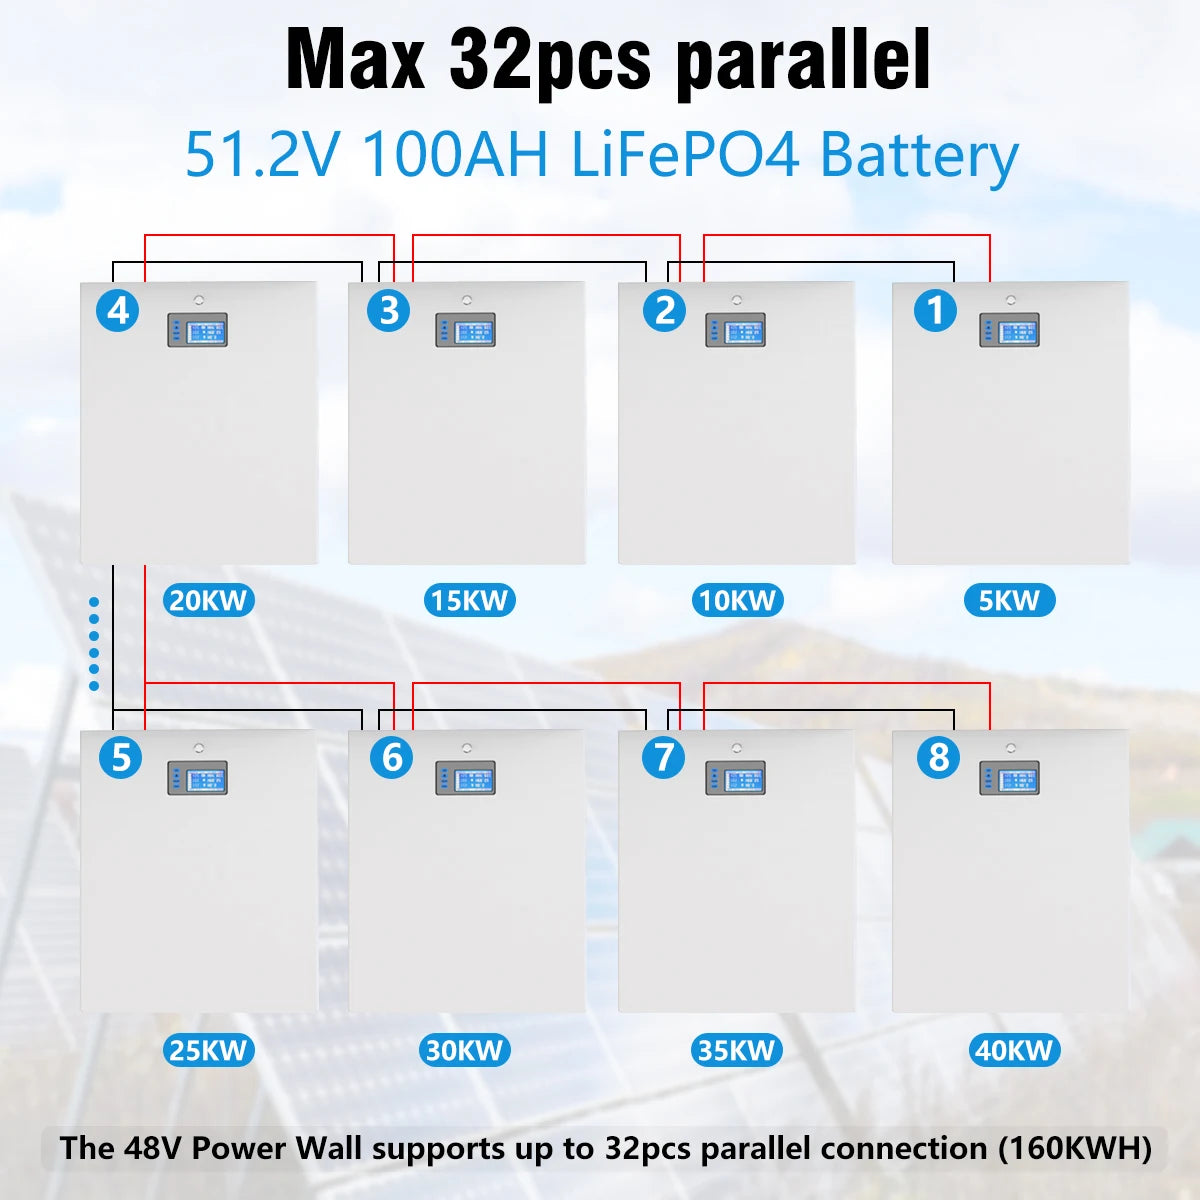 48V 100AH Powerwall LiFePO4 Battery, Powerwall with 100Ah LiFePO4 batteries, supports up to 32 parallel connections (160KWh) for varying power needs.